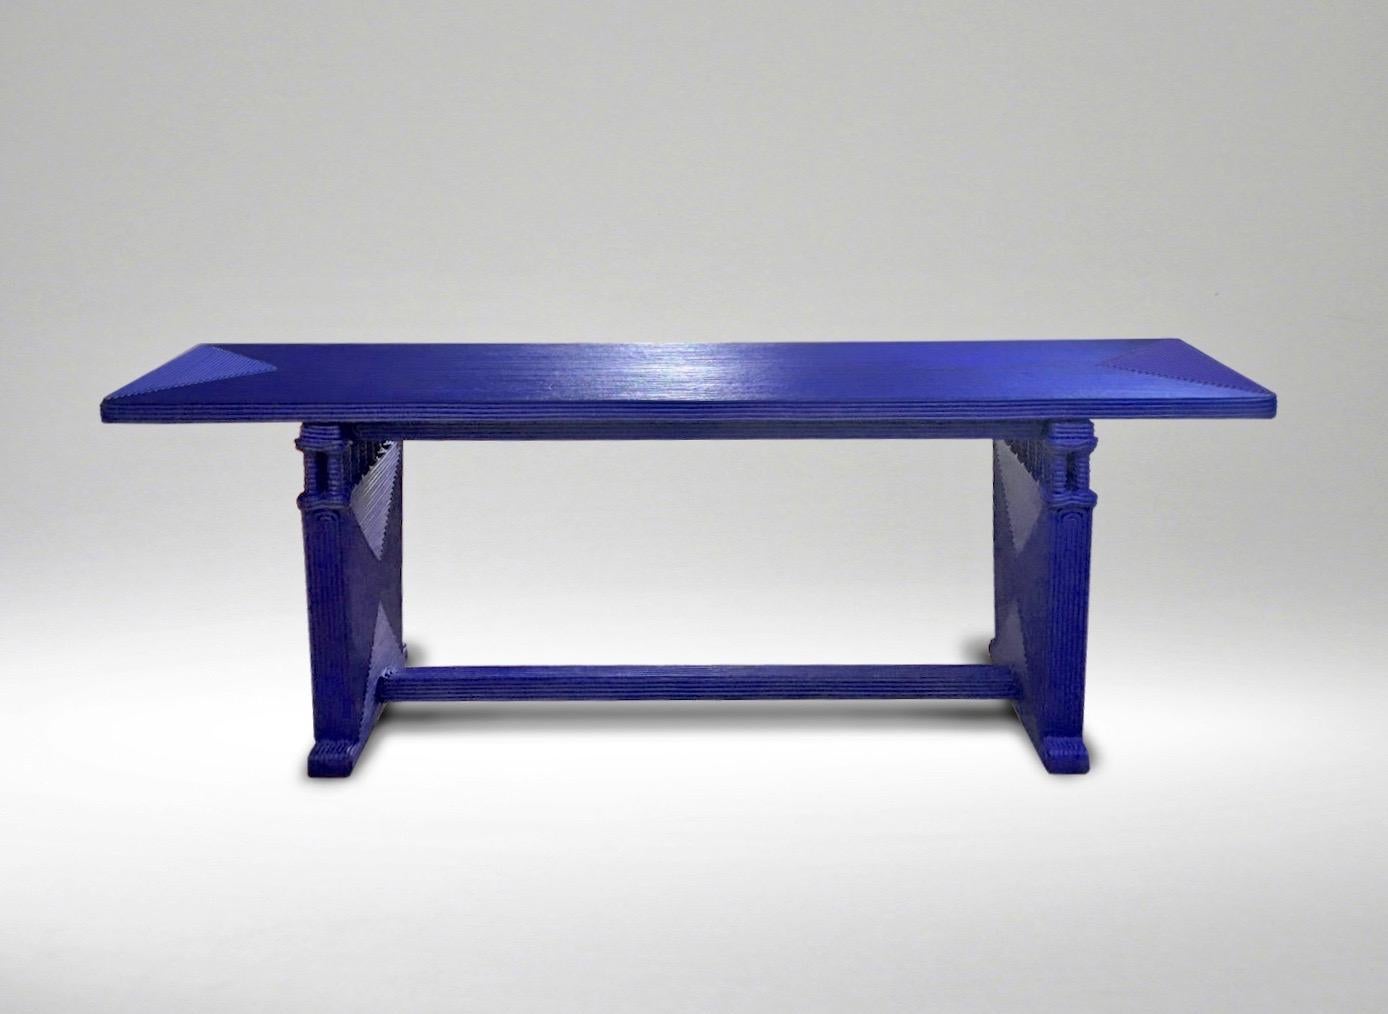 French Contemporary Console by Christian Astuguevieille, 2019